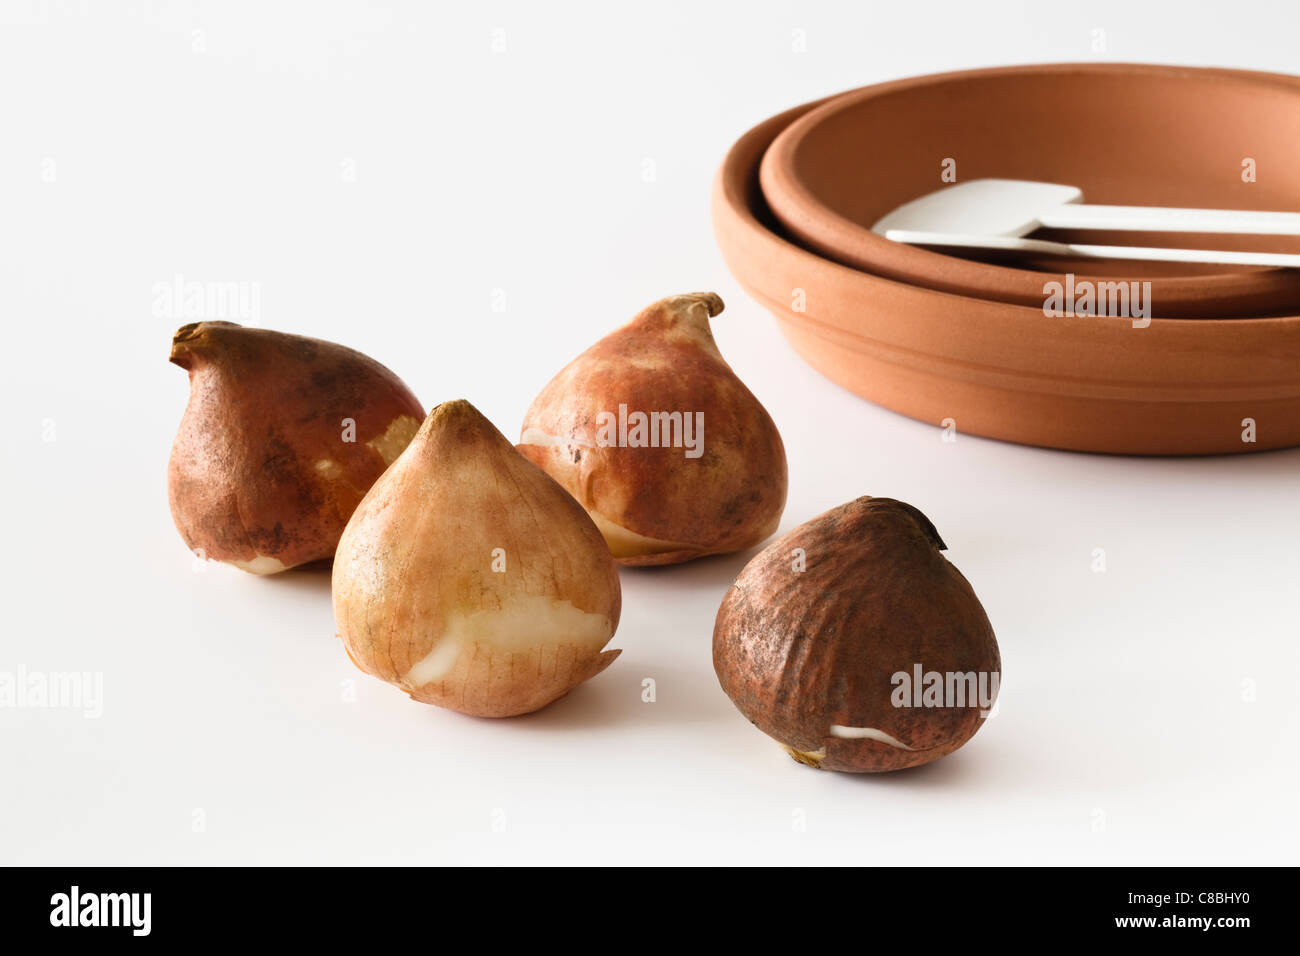 Four tulip bulbs and two clay saucers Stock Photo